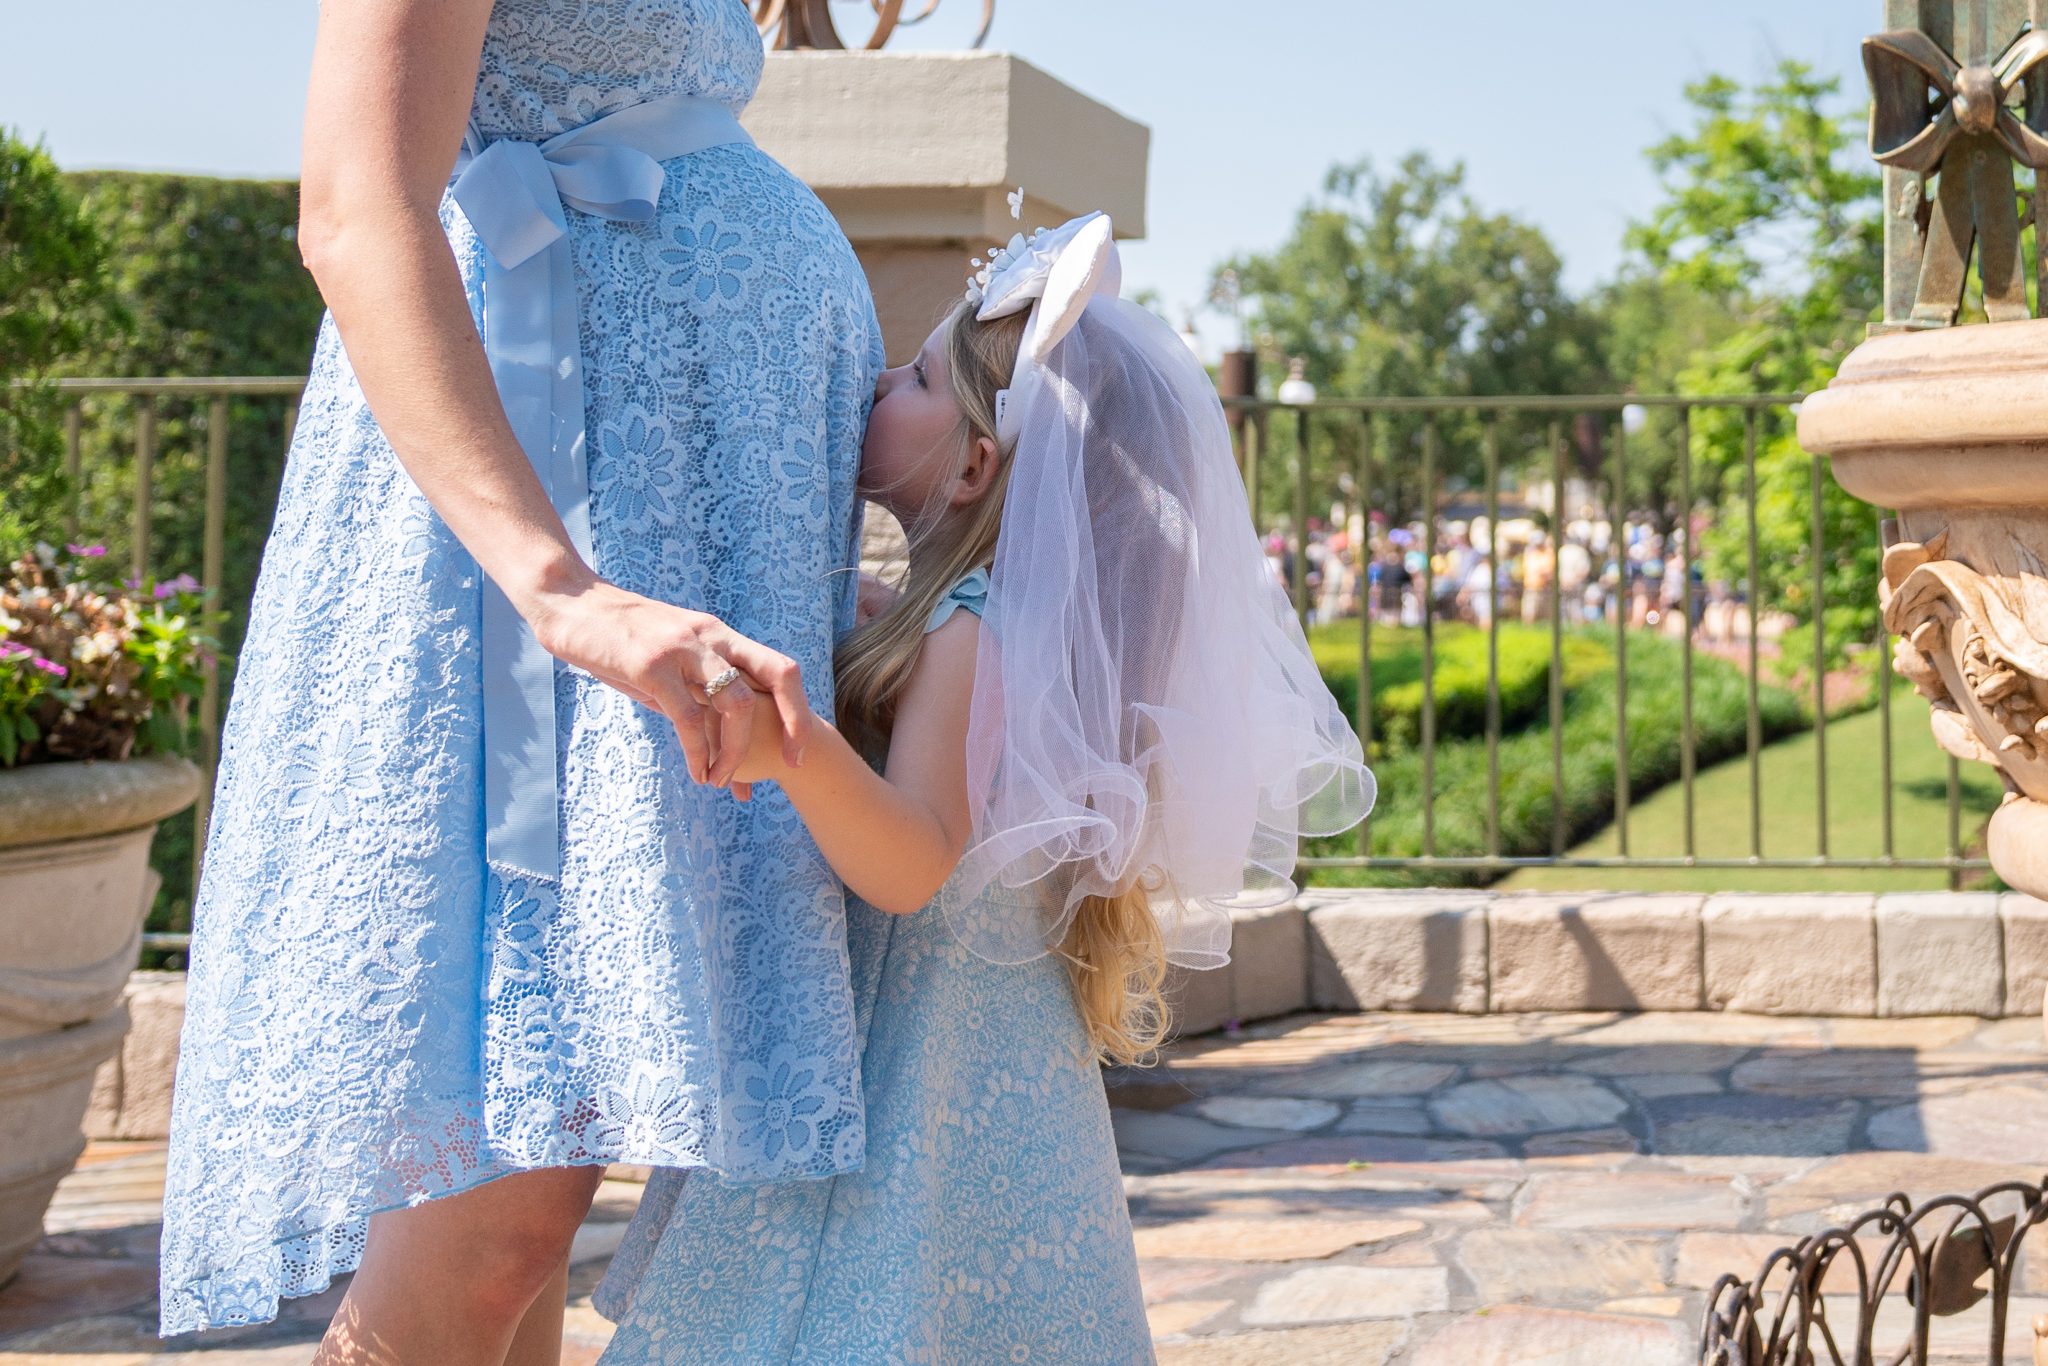 Walt Disney World While Pregnant featured by top US Disney blogger, Marcie and the Mouse | Maternity photo shoot at Walt Disney World